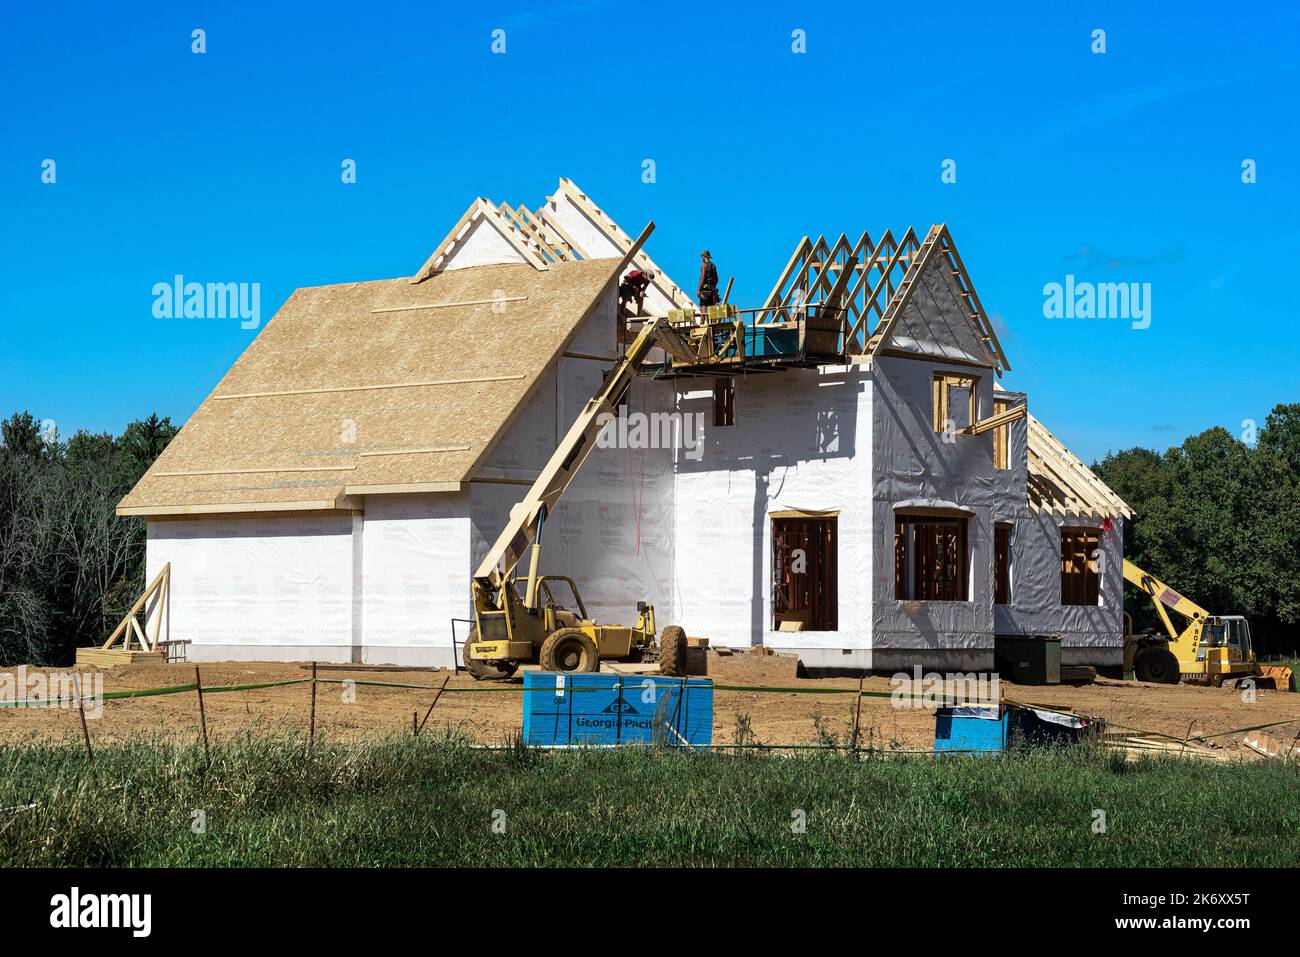 Upscale new home construction. Stock Photo